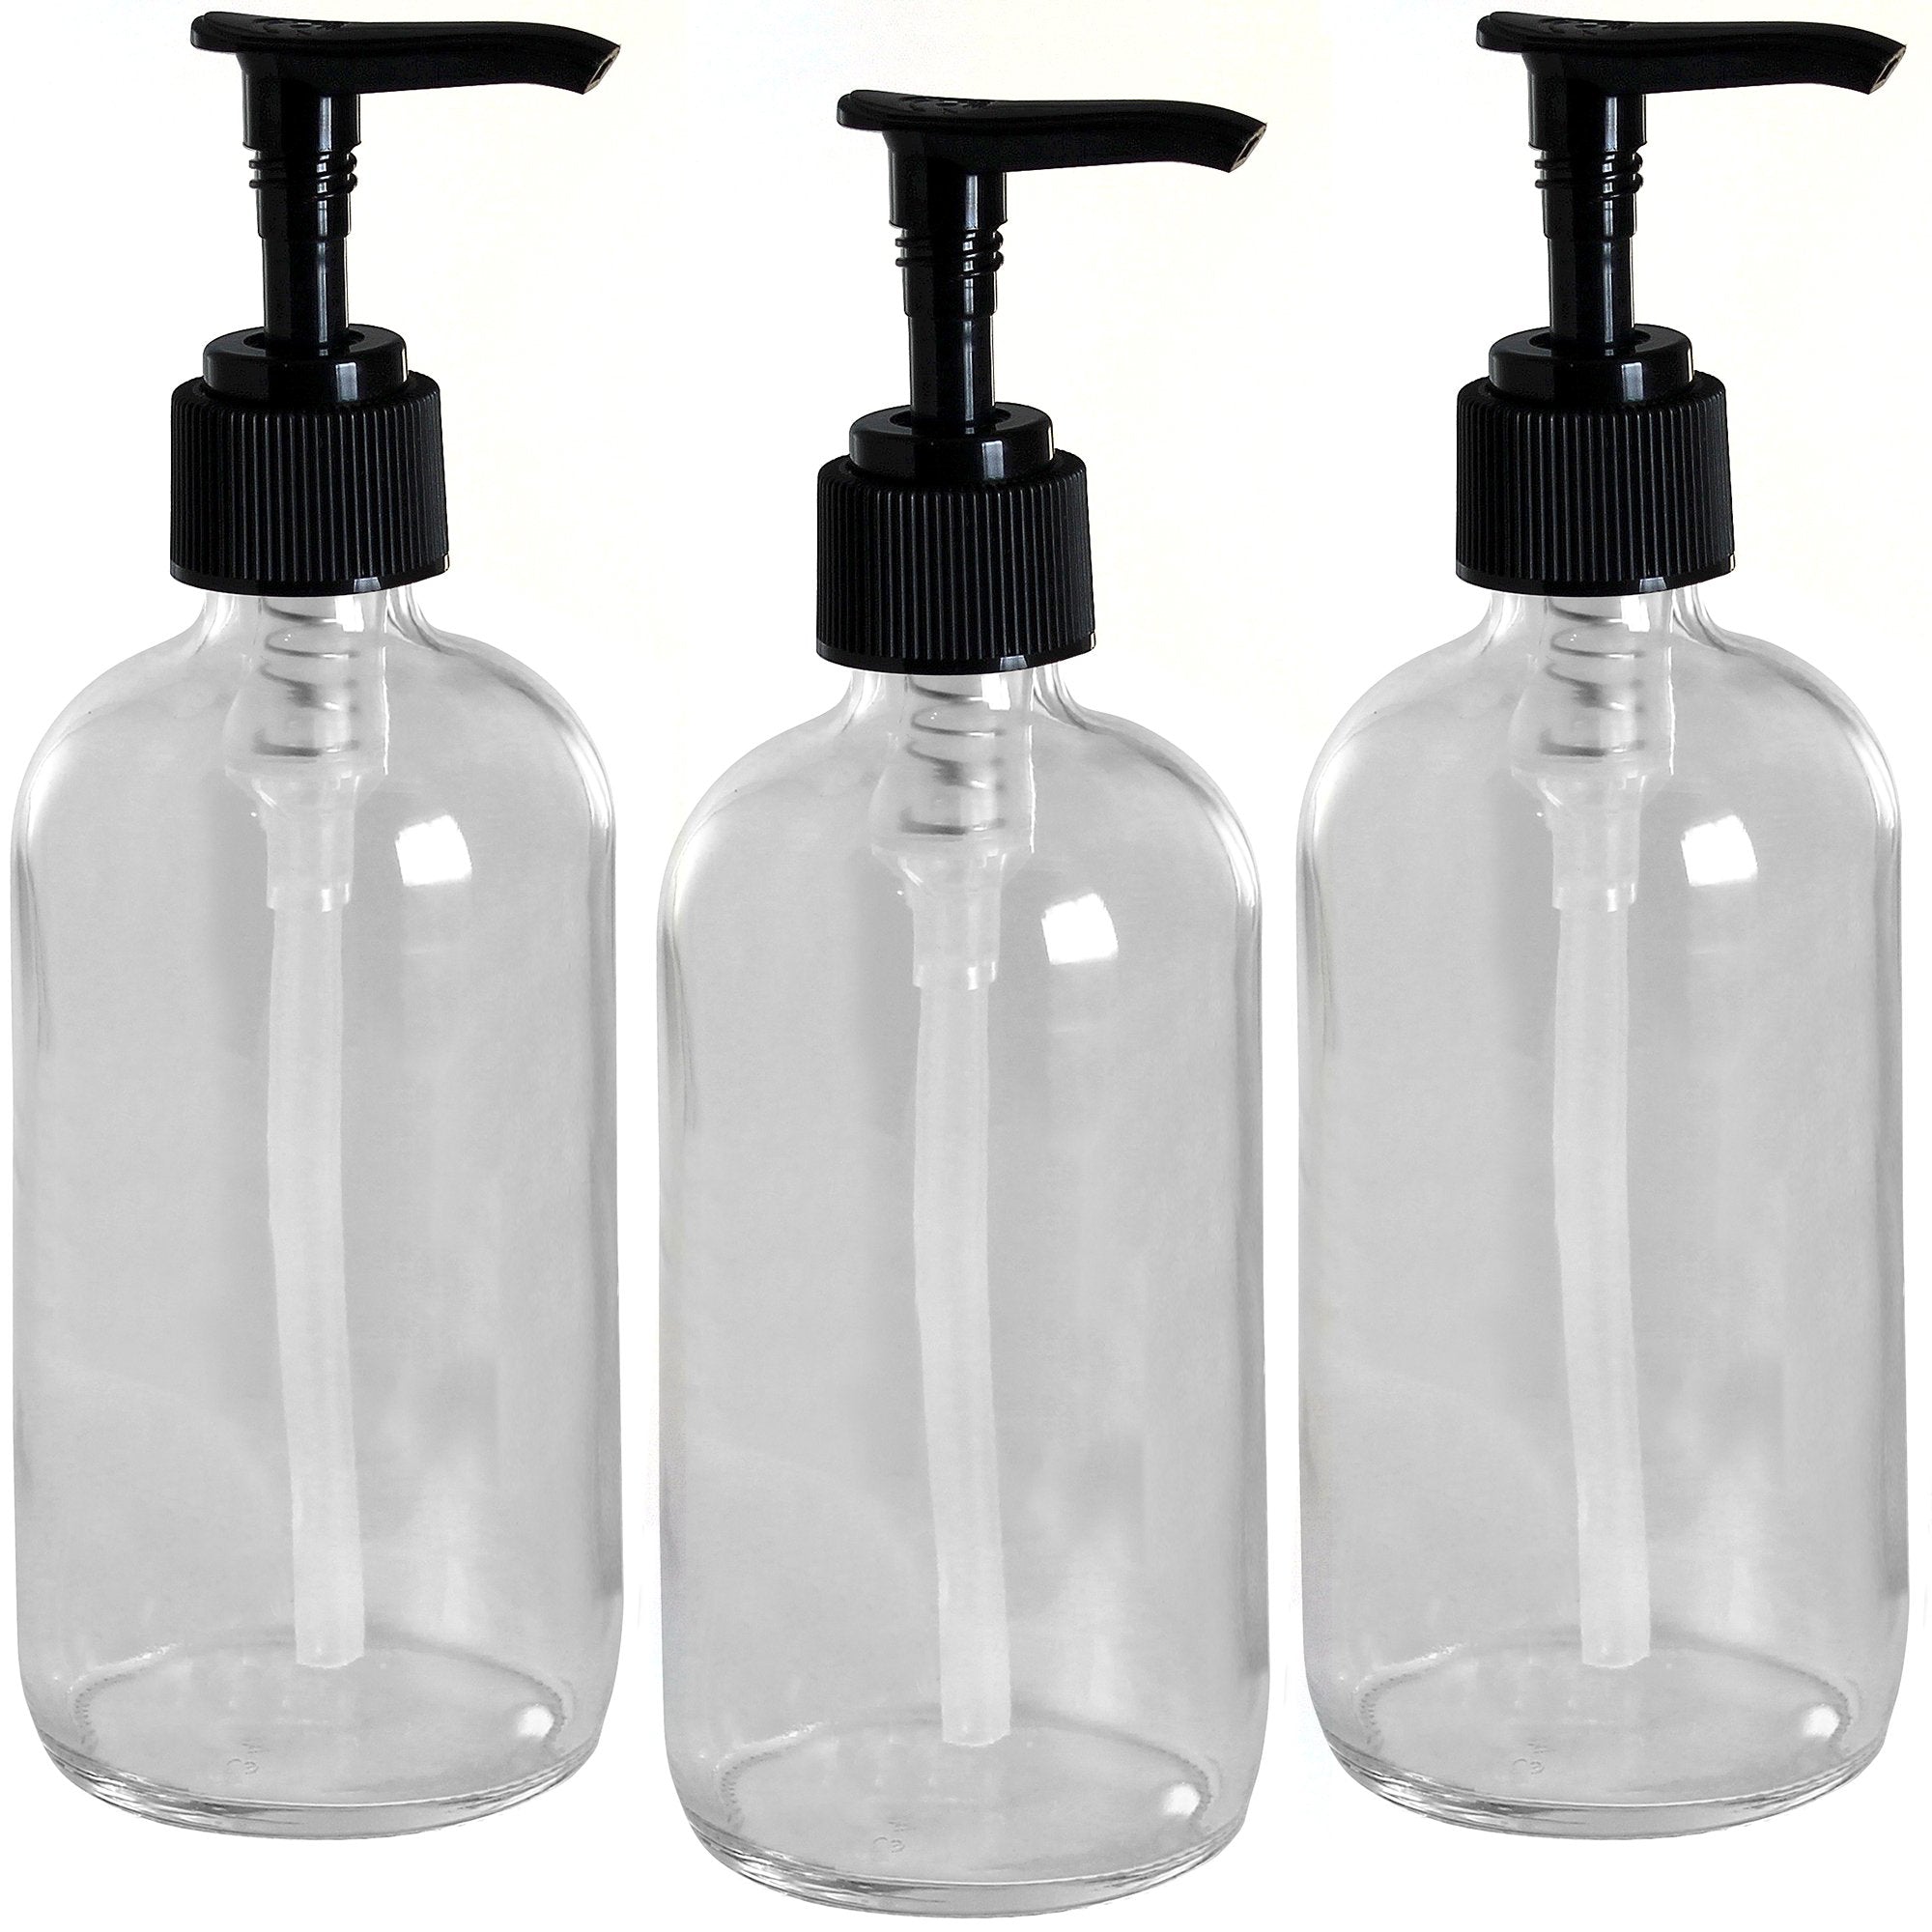 Download Other Health & Beauty - 3 Clear Glass Soap/Lotion Pump ...